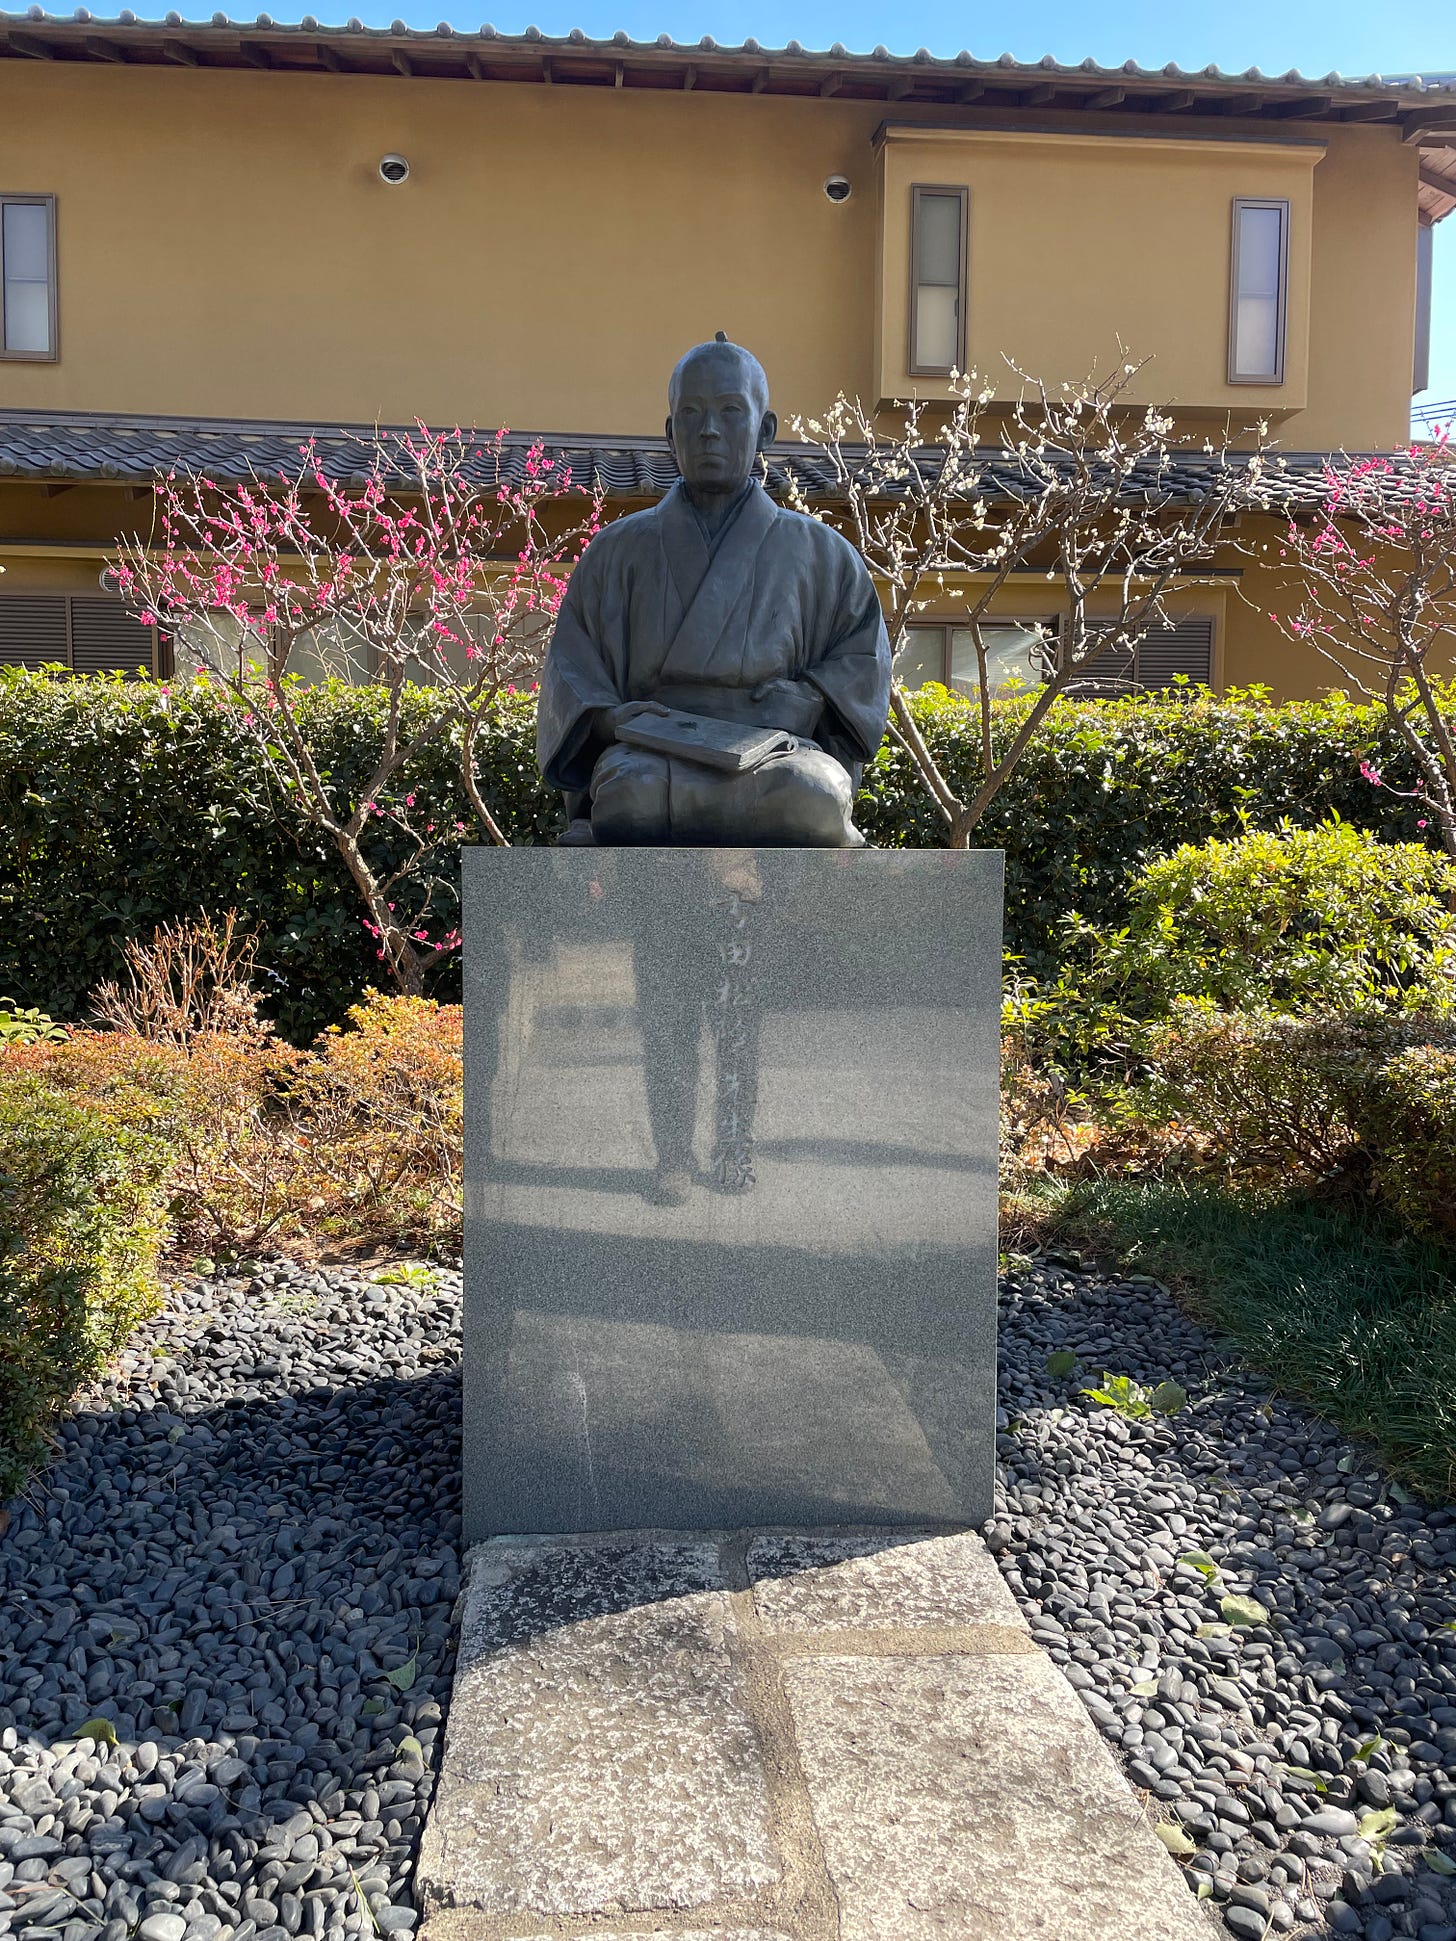 Statue of Shoin-san. In the background, plum trees are blooming in with pink and white buds.